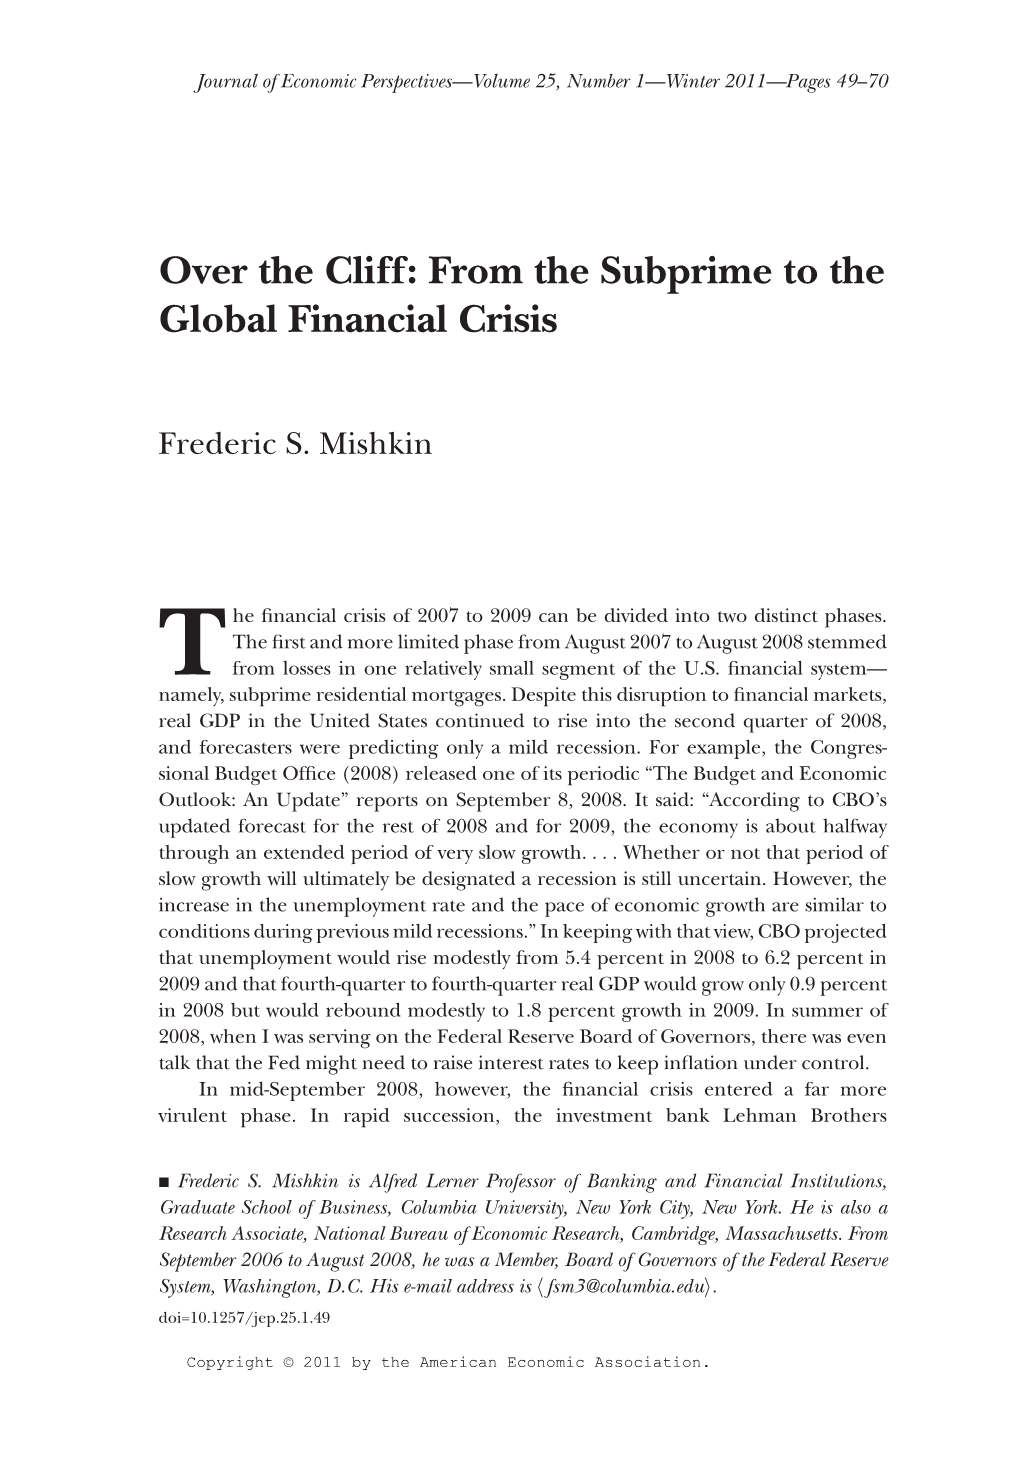 Over the Cliff: from the Subprime to the Global Financial Crisis